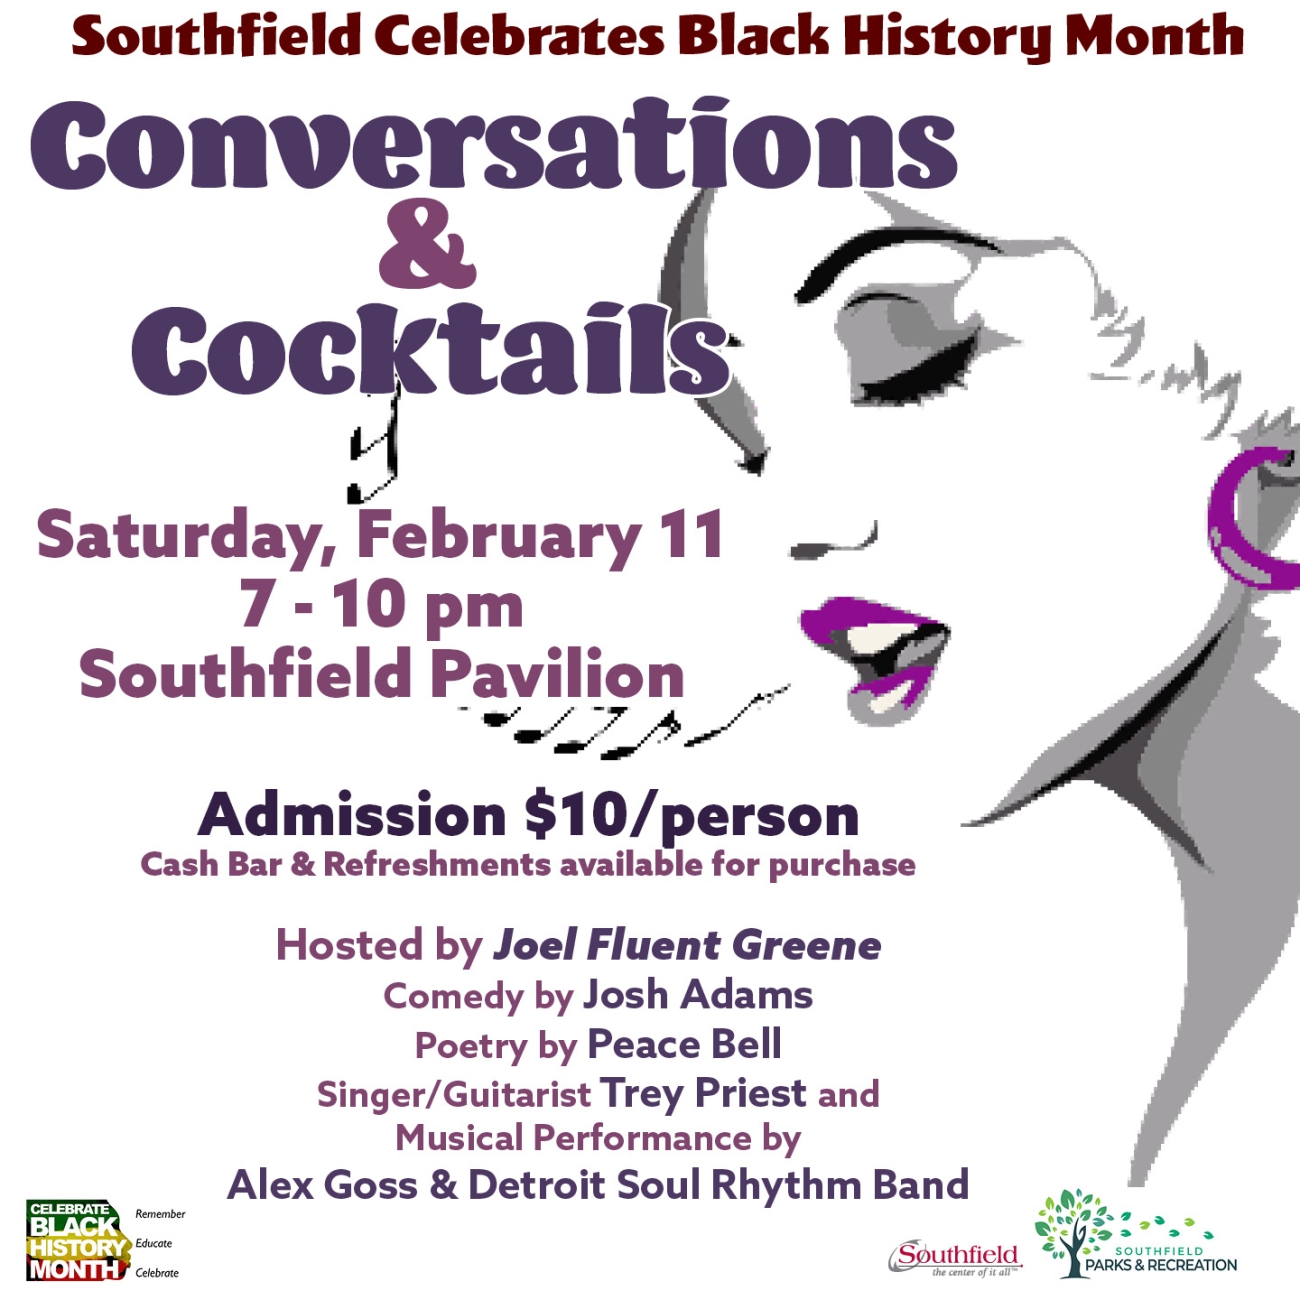 BHM Conversations and Cocktails 